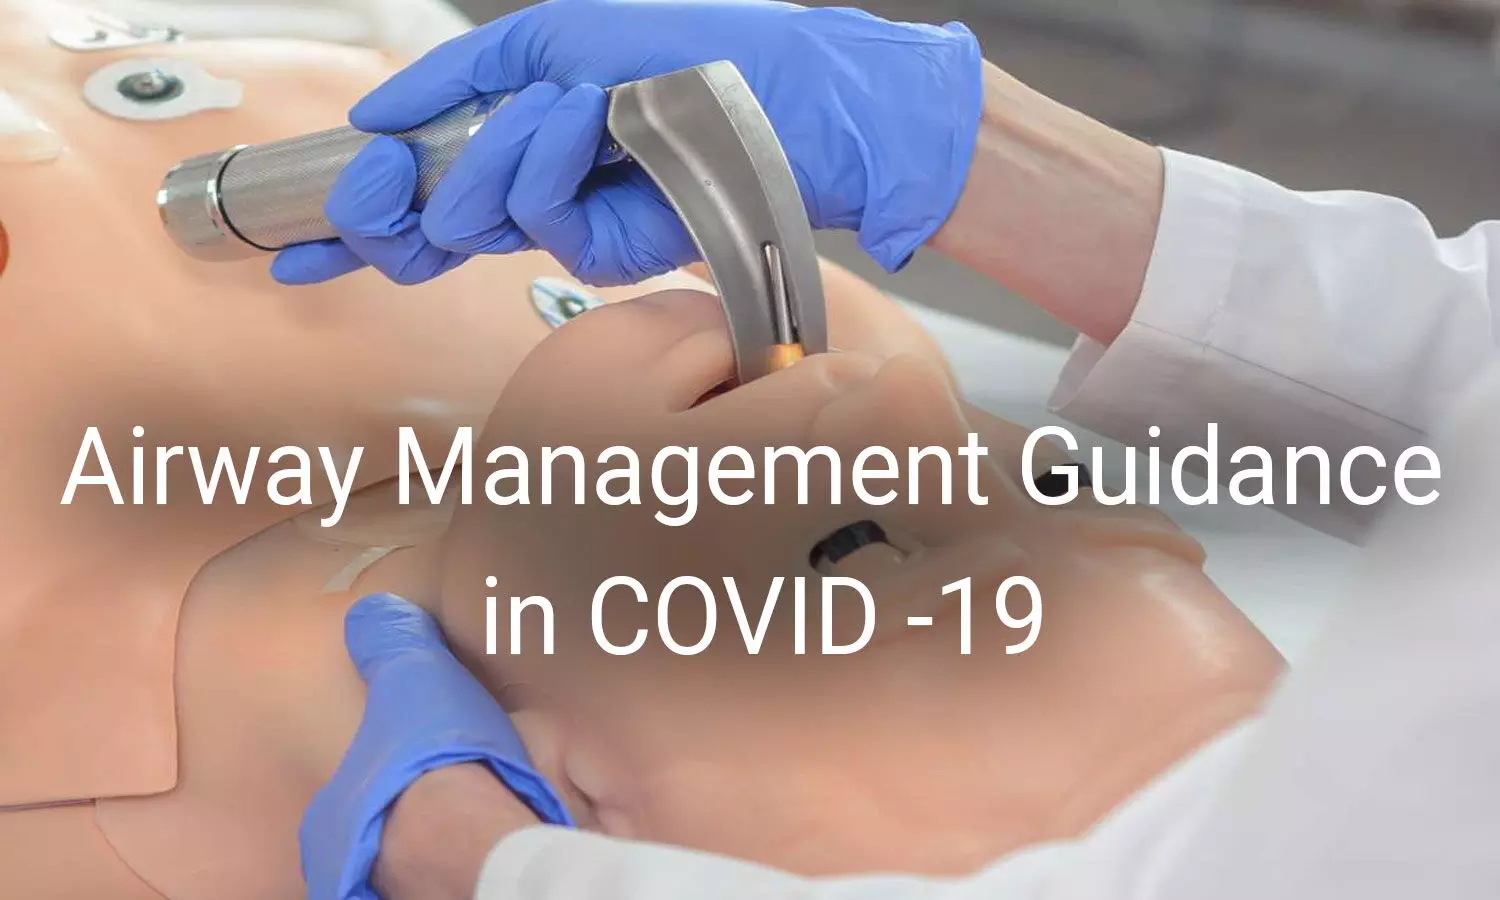 Tracheal intubation in COVID-19: Multisociety guidance released